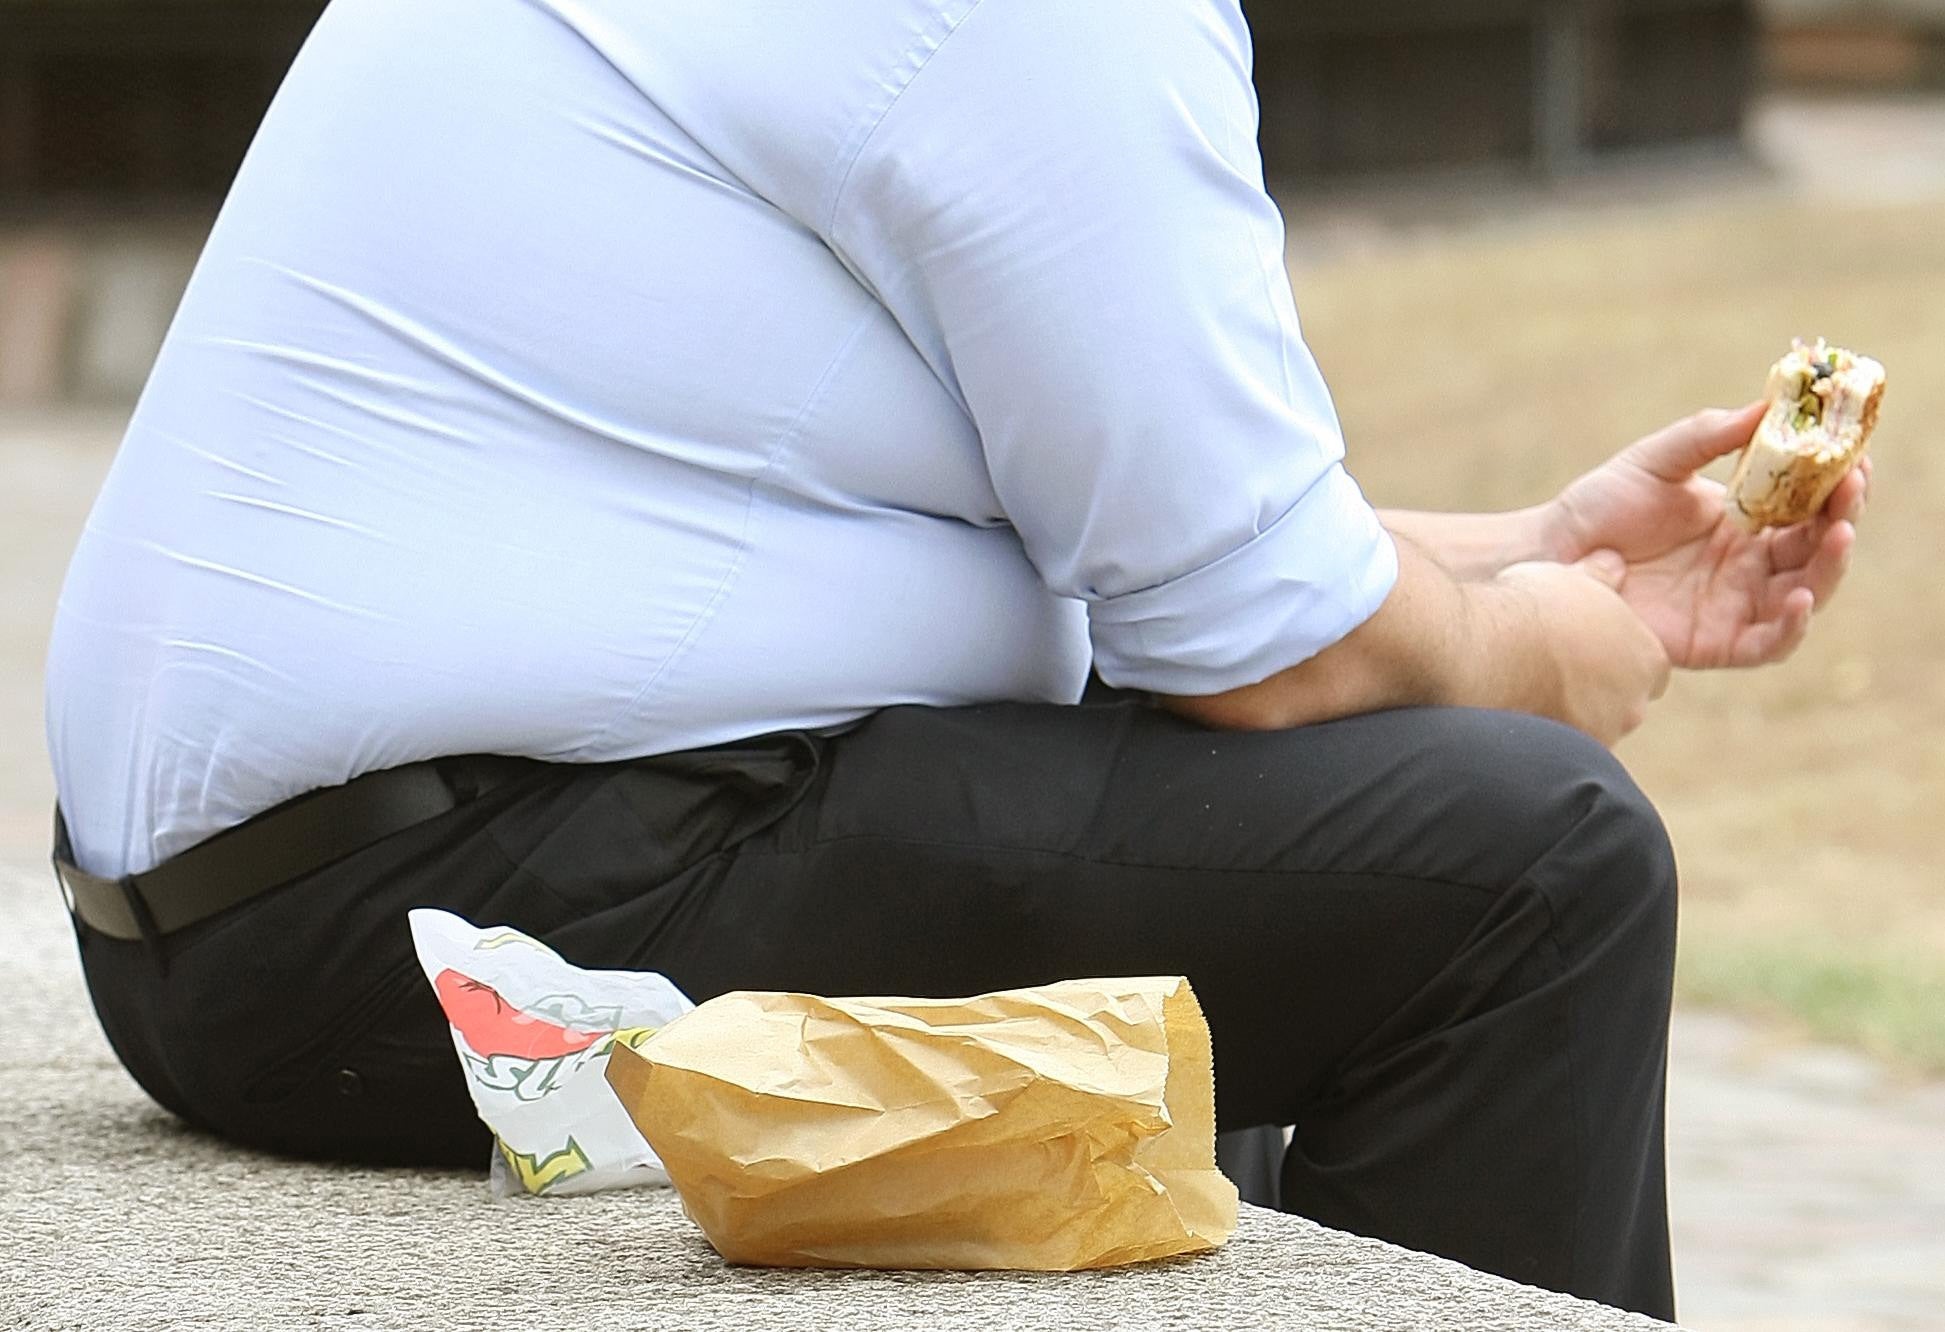 A report says more than 42 million adults will be obese or overweight by 204